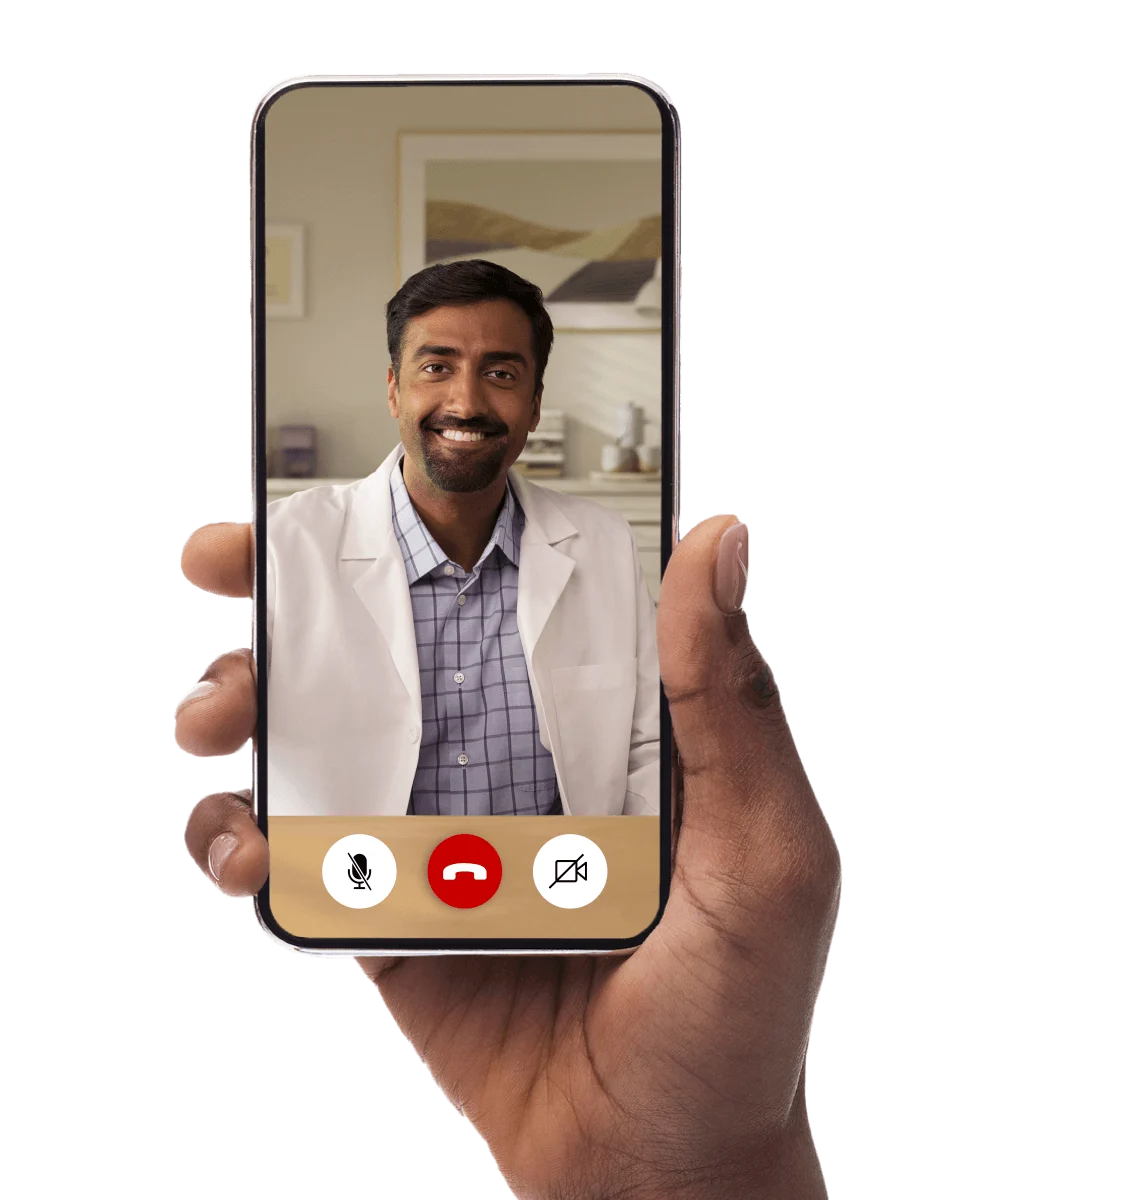 Video chat screen, with doctor